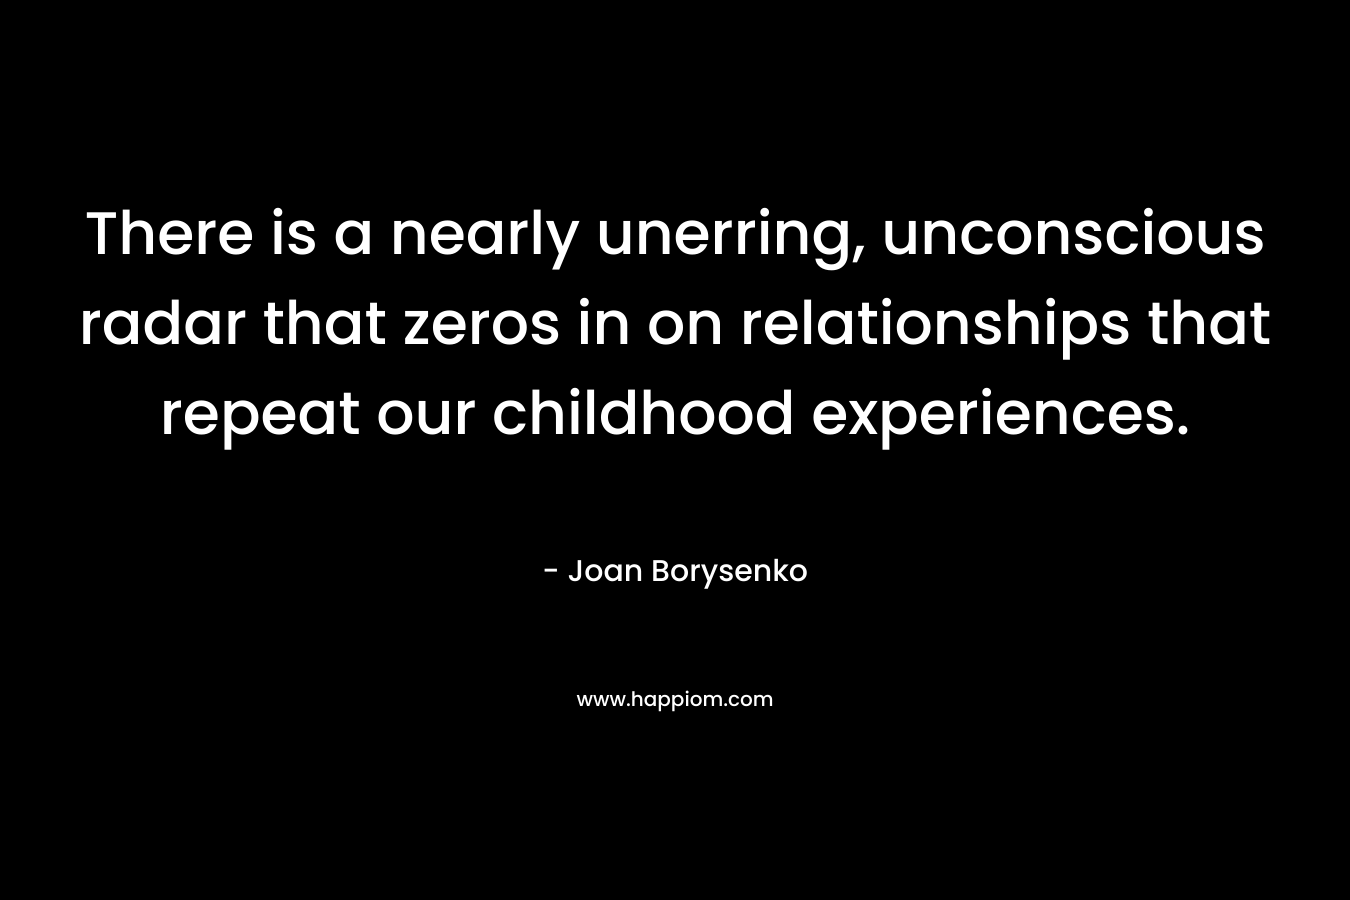 There is a nearly unerring, unconscious radar that zeros in on relationships that repeat our childhood experiences.